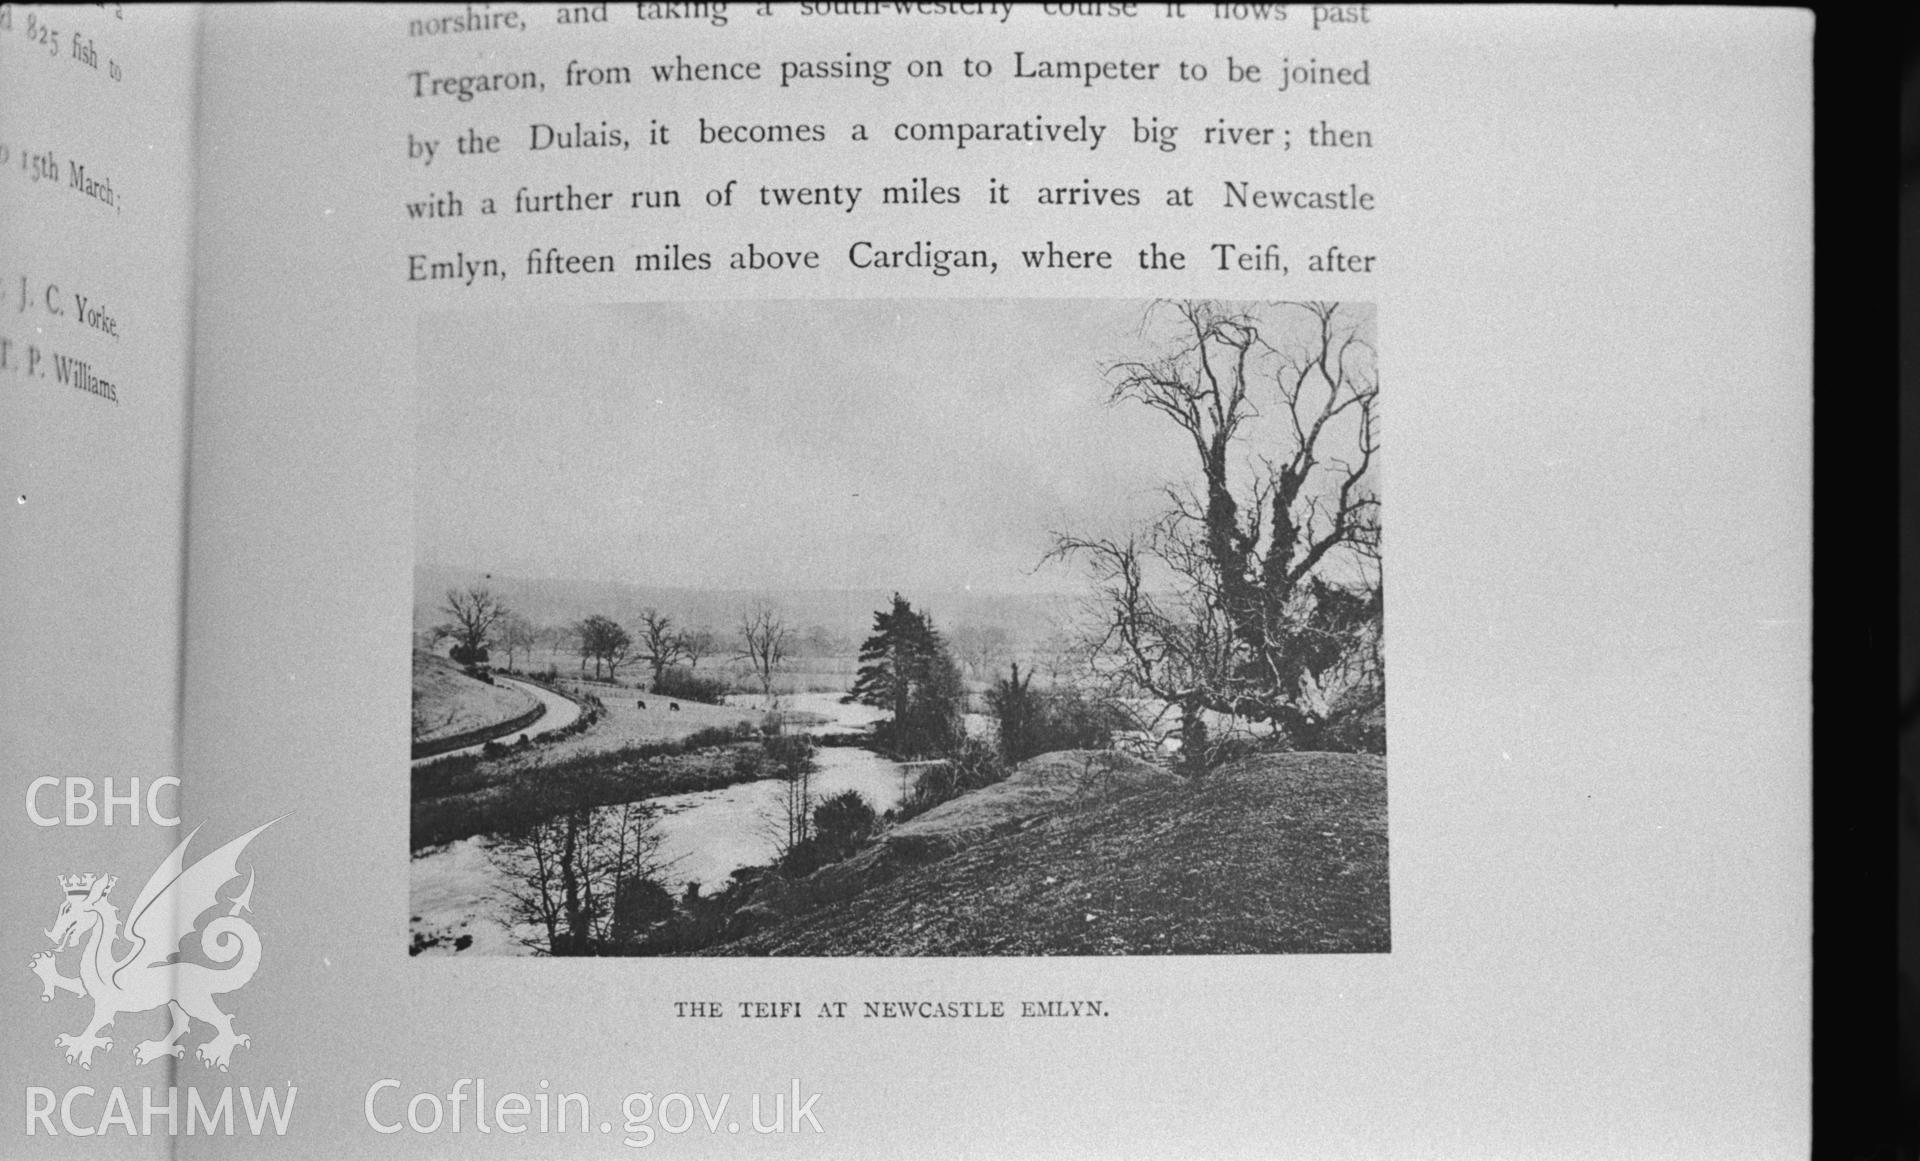 Copy of black and white photograph entitled 'The Teifi at Newcastle Emlyn,' from an unidentified book. Photograph copied by Arthur O. Chater in January 1968 for his own private research.